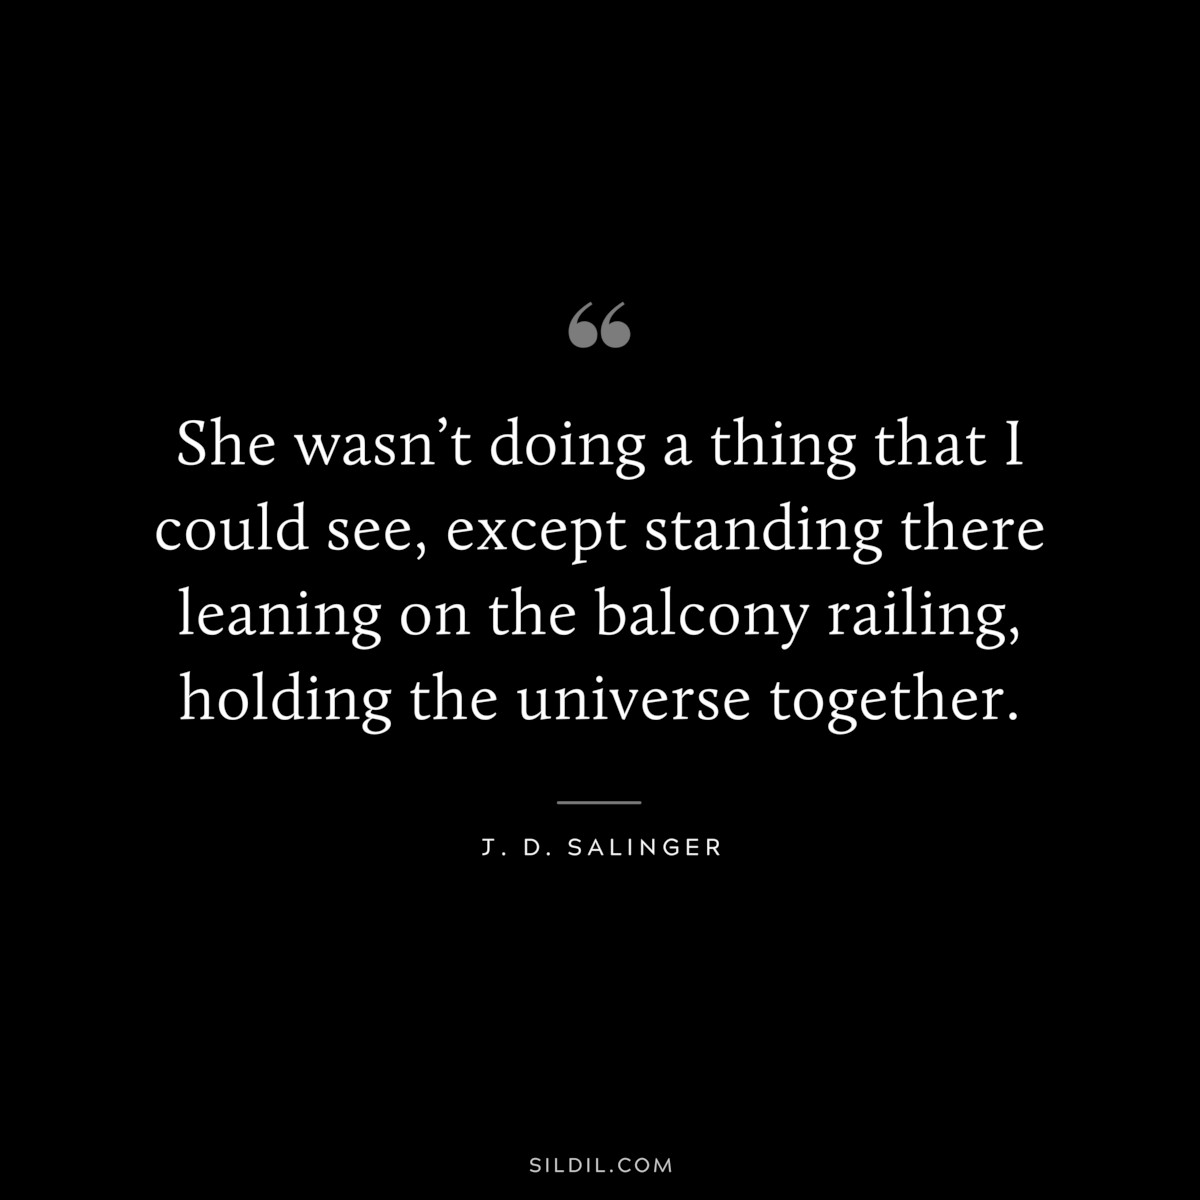 She wasn’t doing a thing that I could see, except standing there leaning on the balcony railing, holding the universe together. — J. D. Salinger